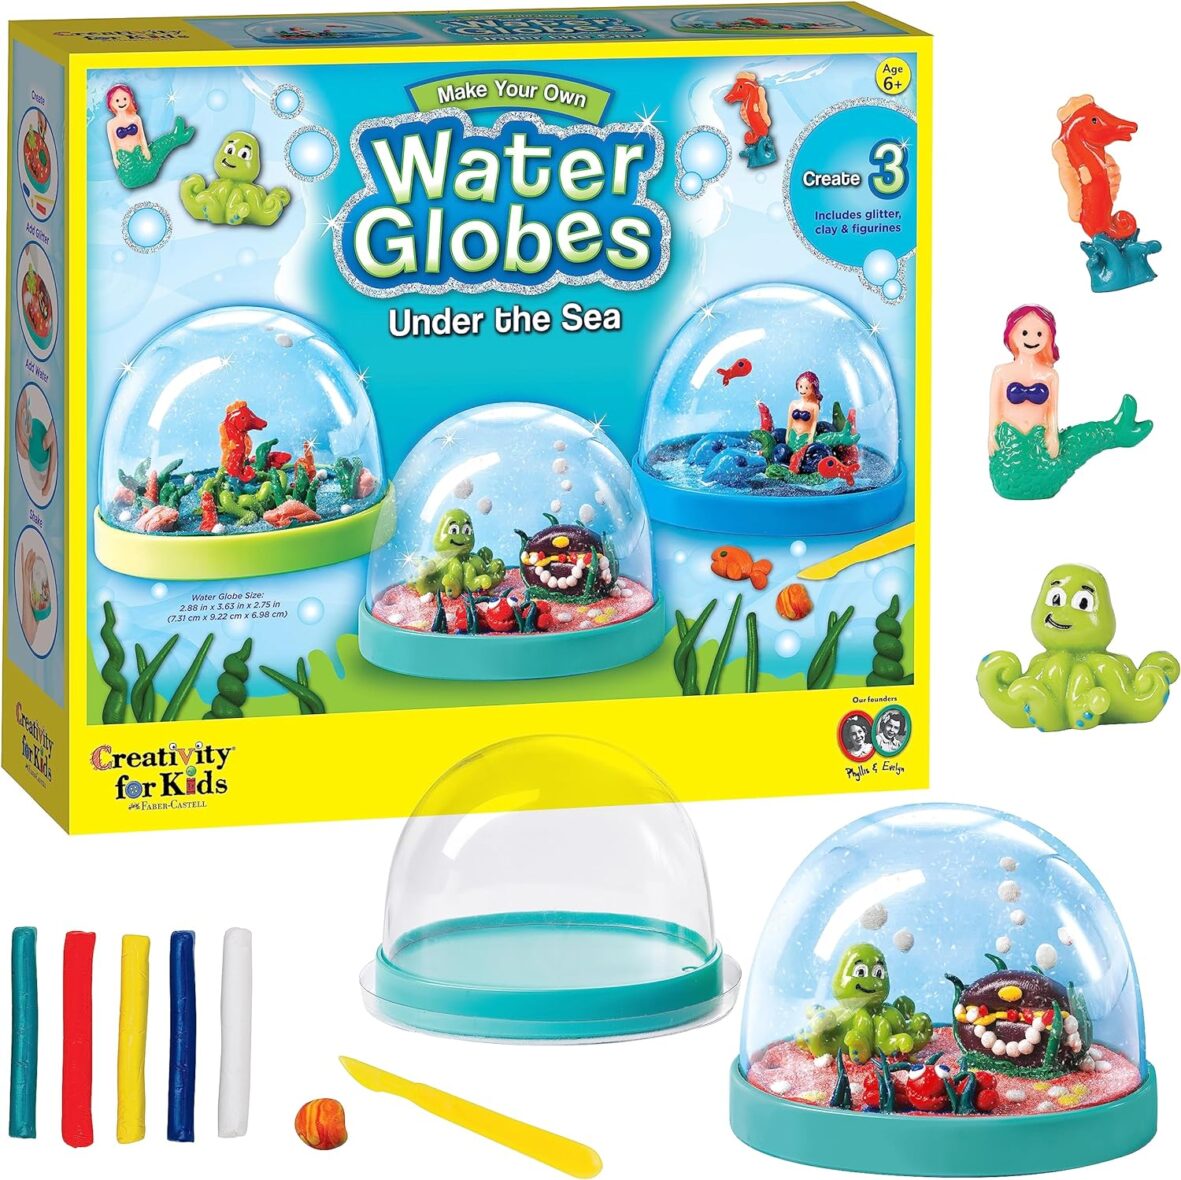 Creativity for Kids Make Your Own Under the Sea Water Globes – Make 3 DIY Snow Globes, Arts and Crafts